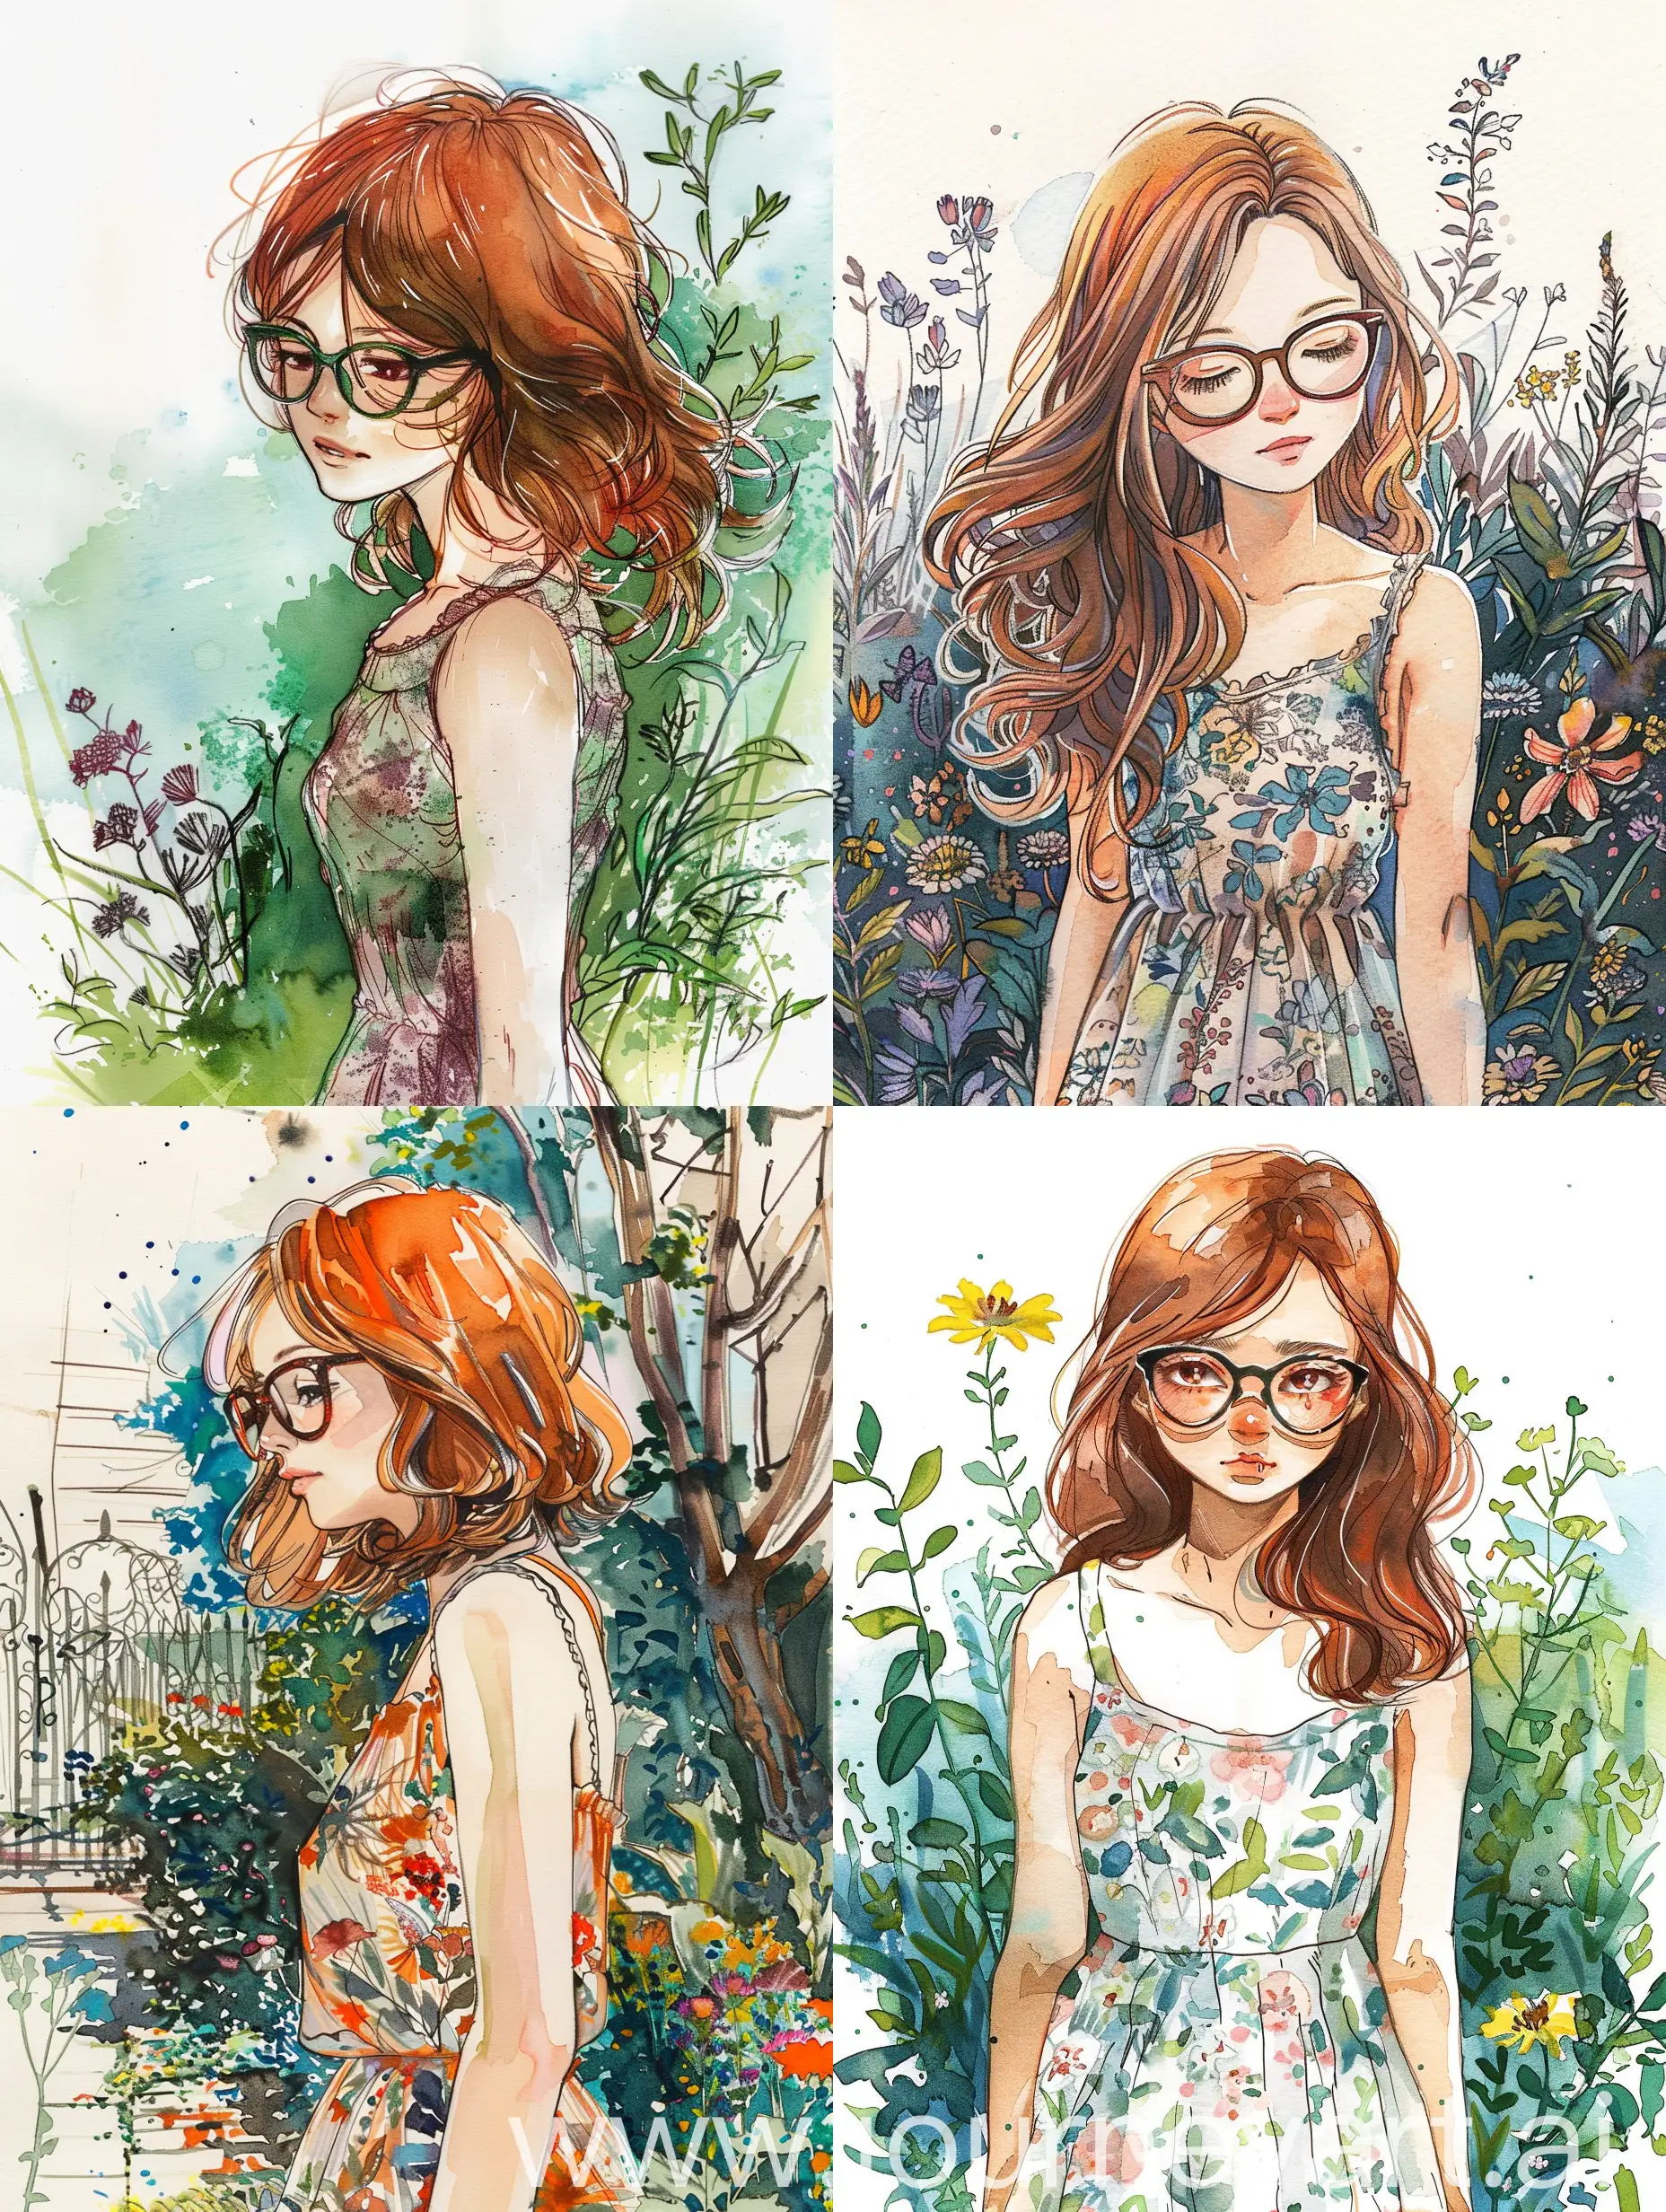 Delicate-Watercolor-Drawing-of-Girl-with-Chestnut-Hair-in-Garden